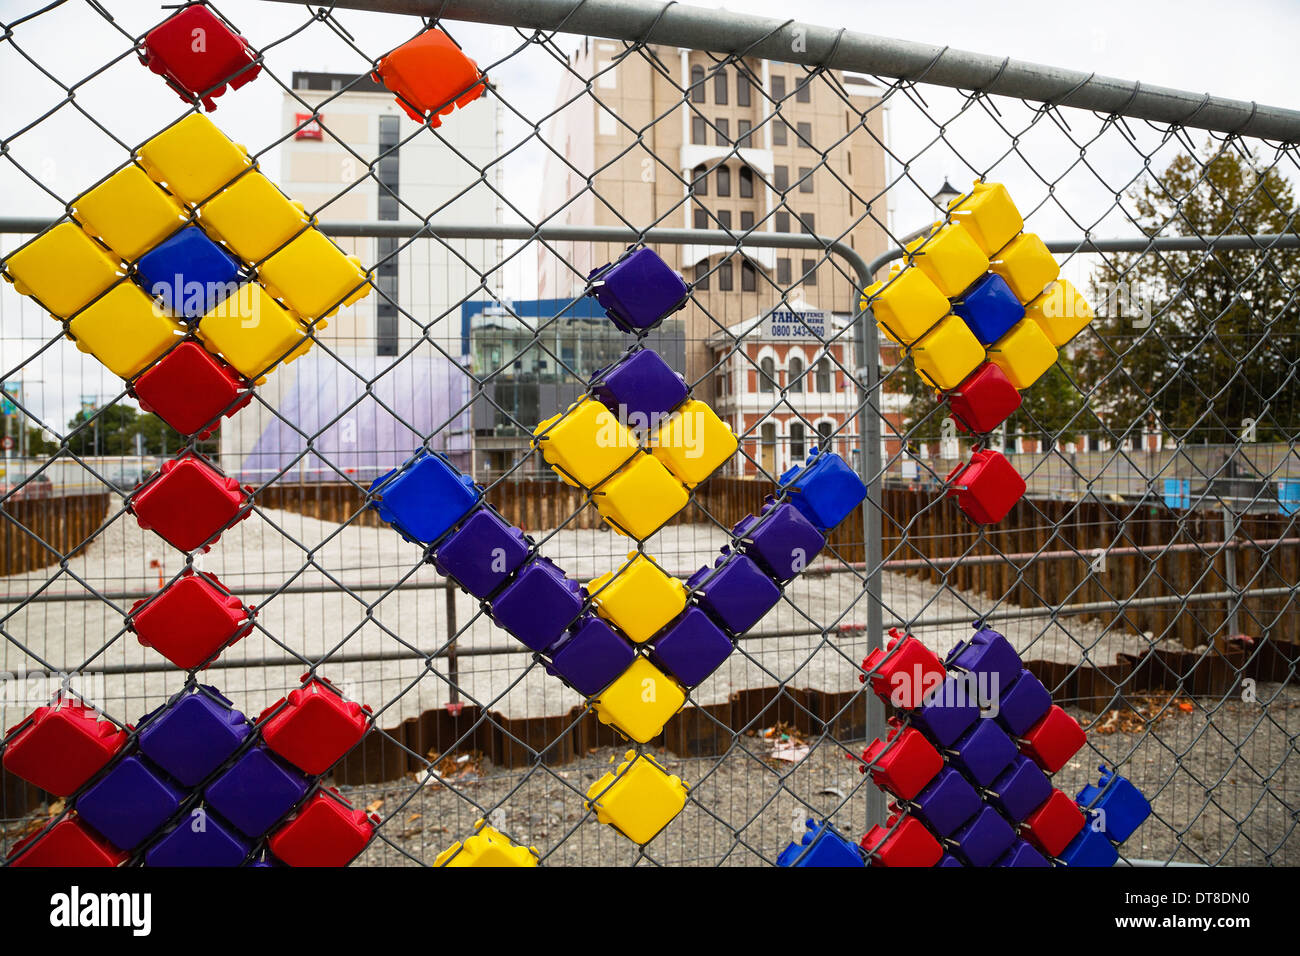 February 2014. Chain link fencing around building site. Earthquake rebuild. Cathedral Square, Christchurch City, New Zealand. Stock Photo